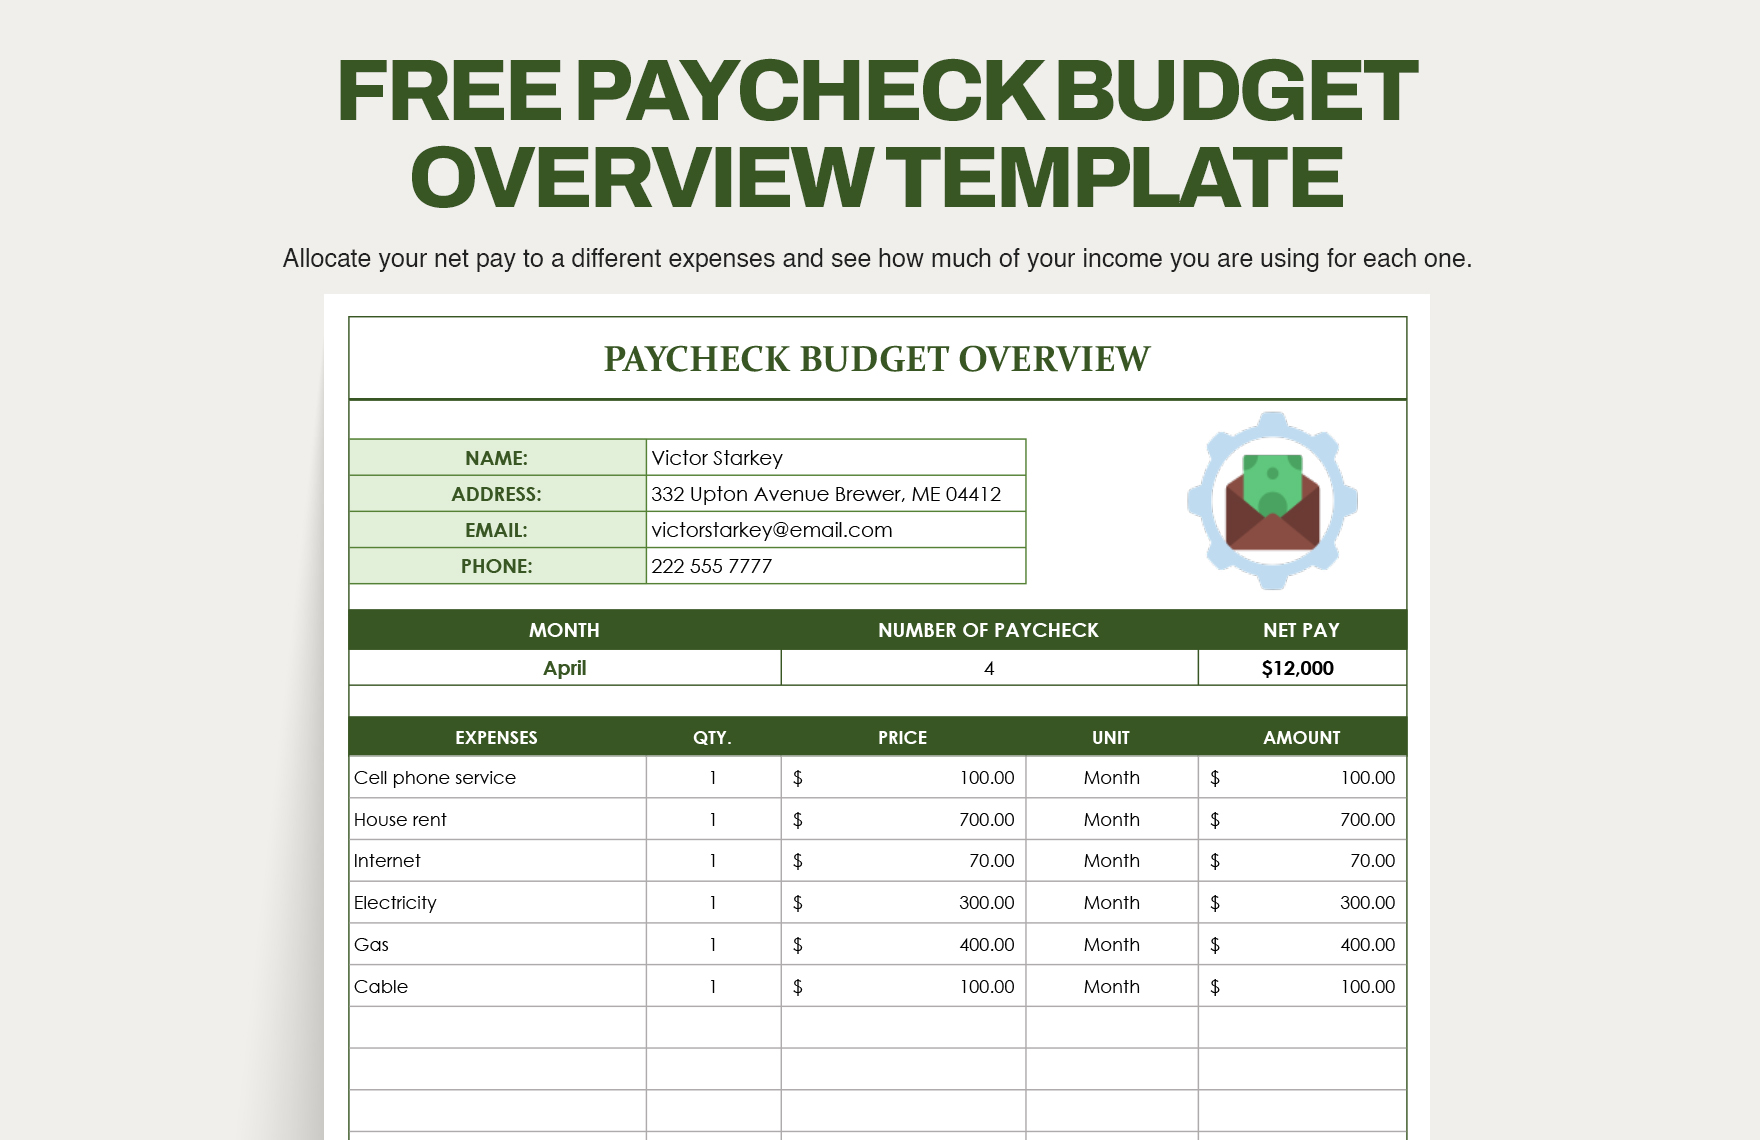 Paycheck Budget Overview Template